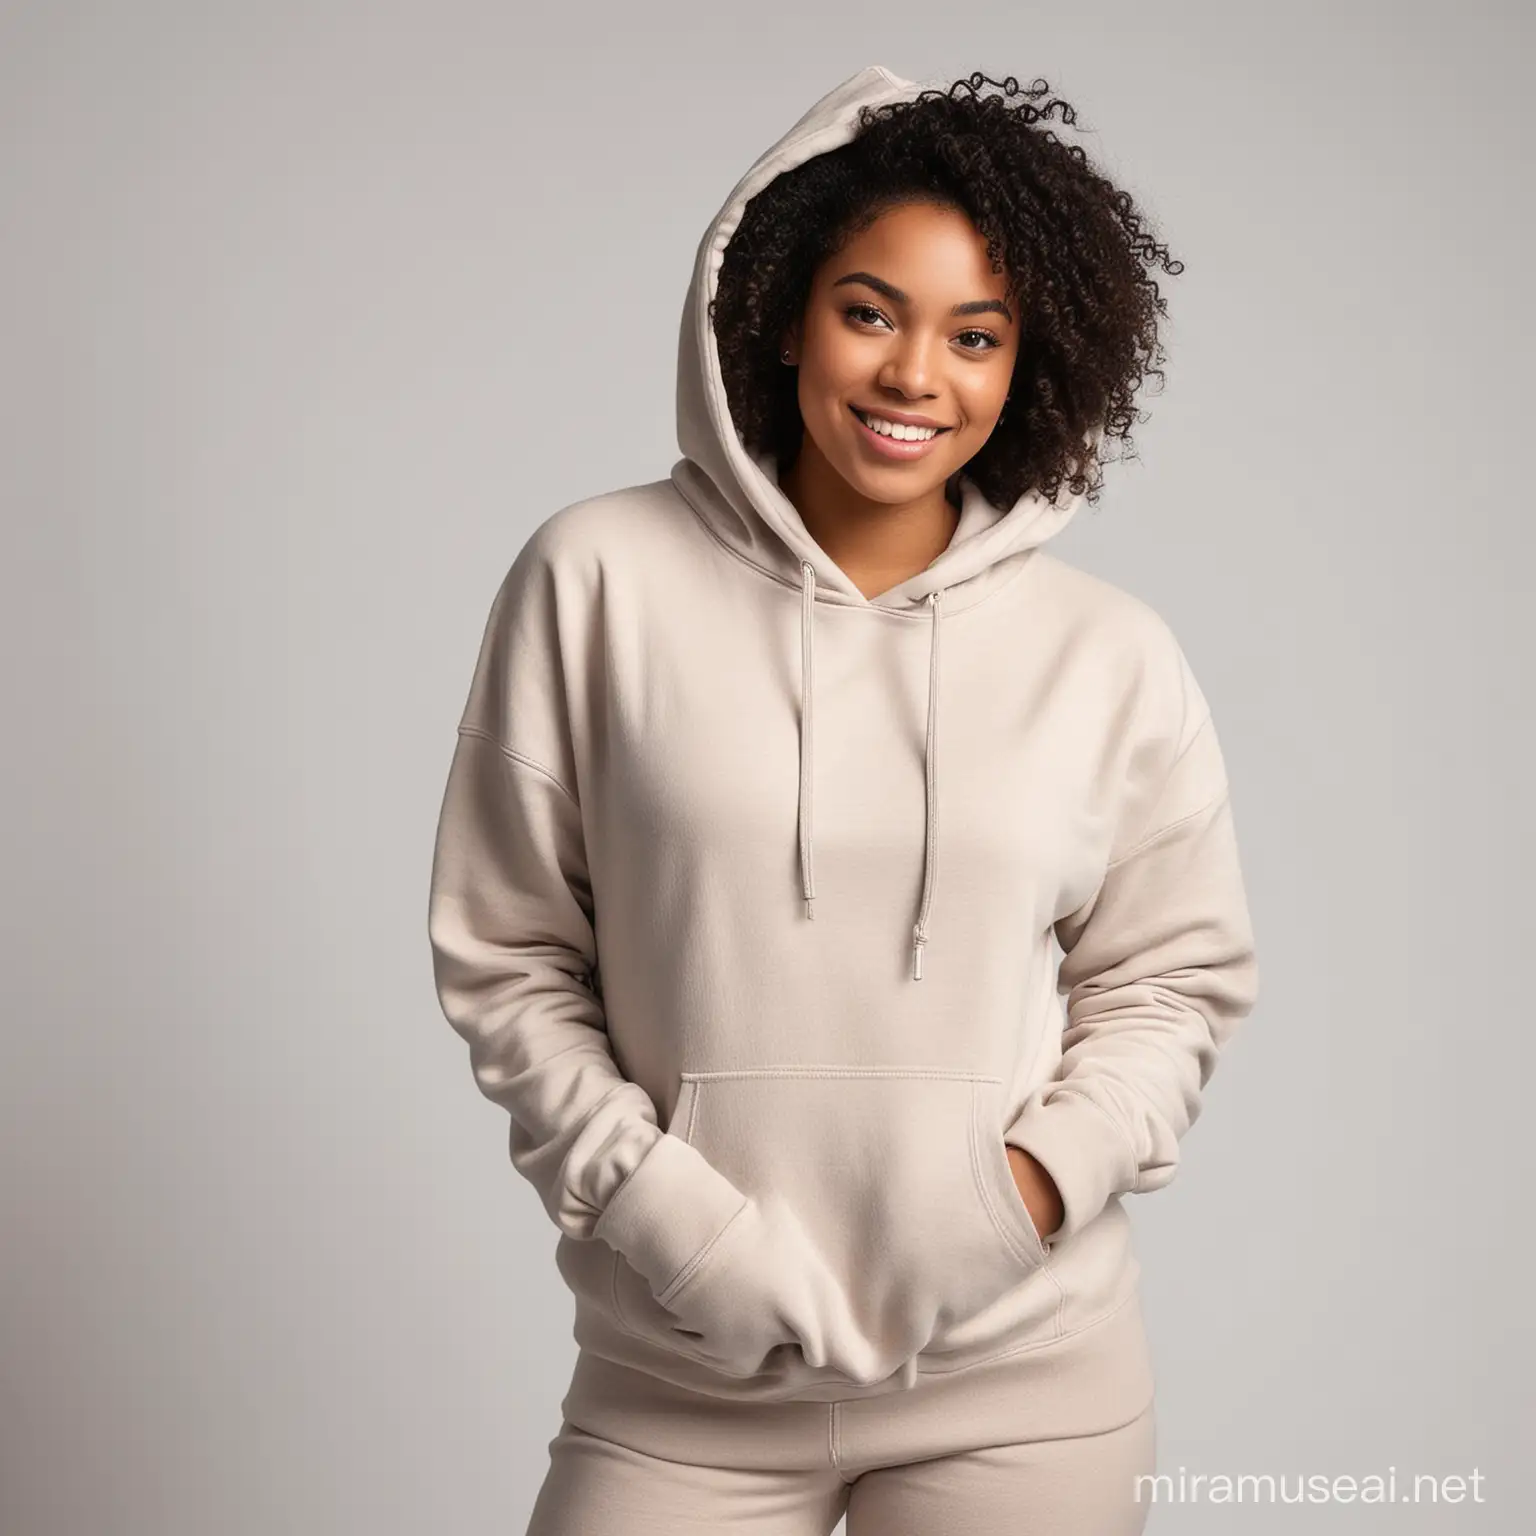 Joyful Woman of Color in Hooded Sweatshirt Poses Against White Background